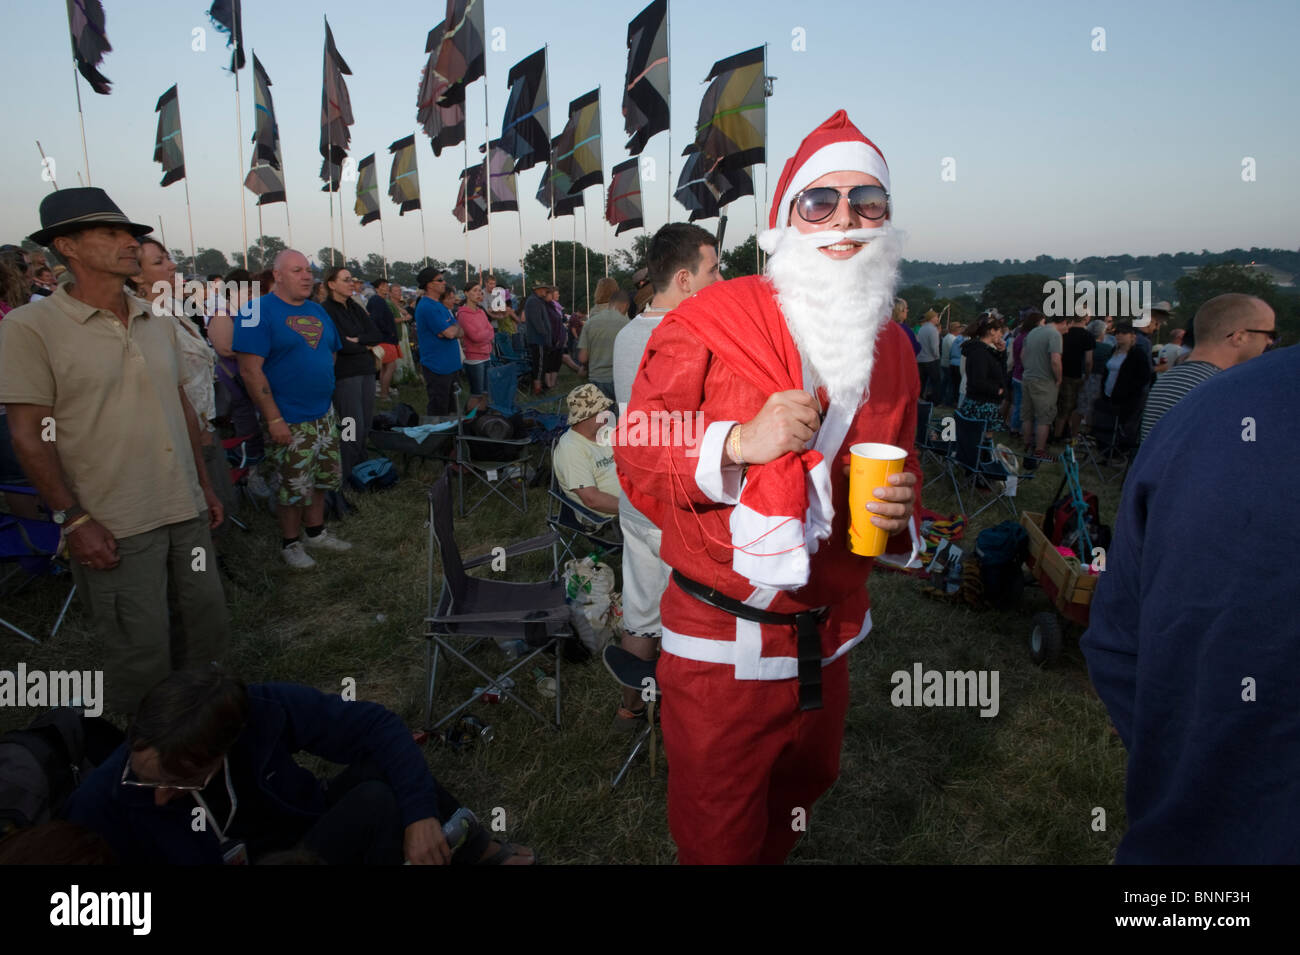 Glastonbury Festival. Man dressed in fancy dress costume as Father Christmas / Santa Claus in a crowd. Stock Photo